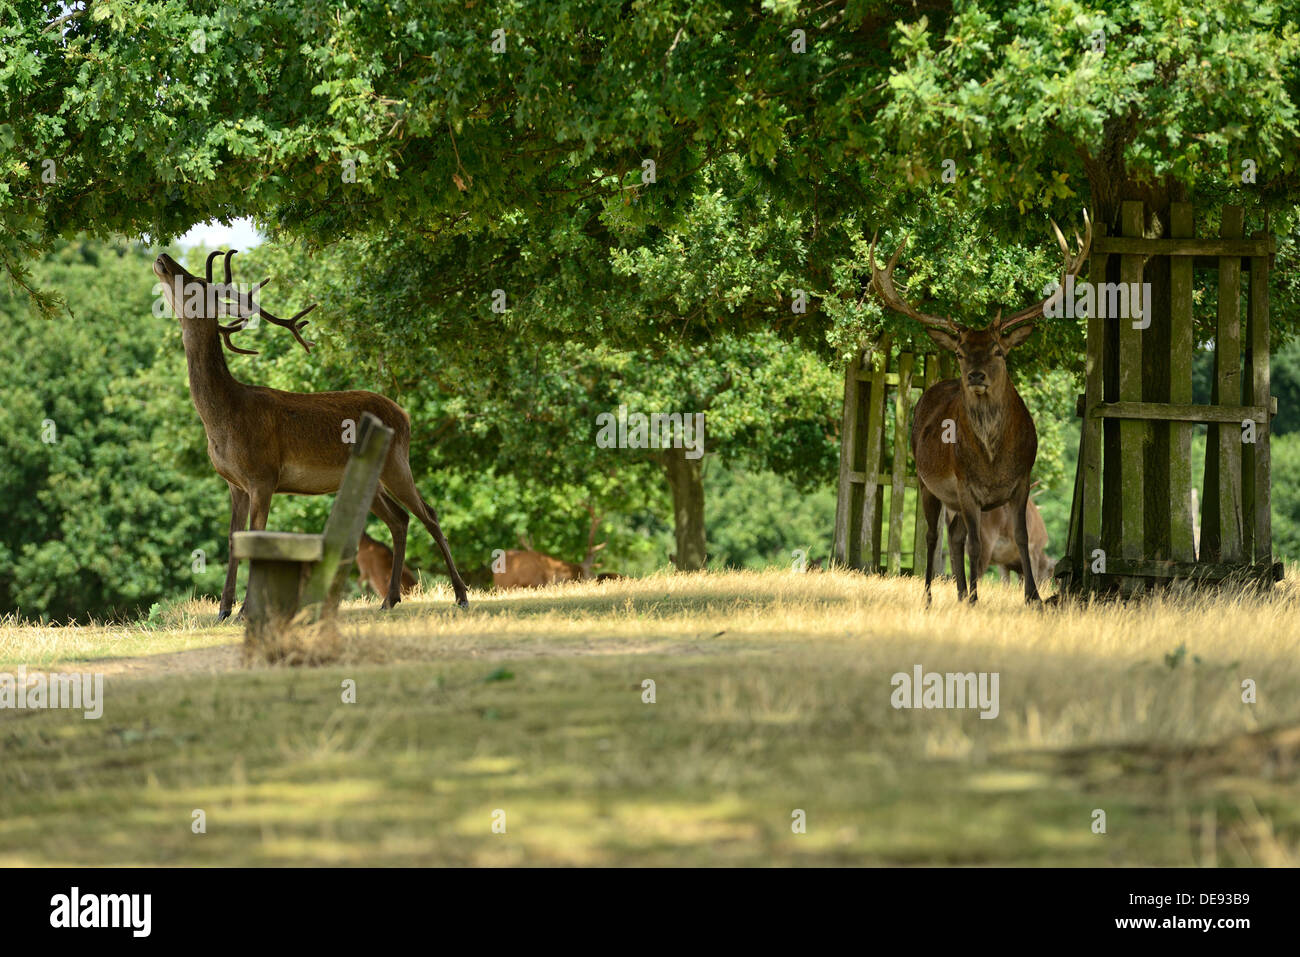 Stag deer feeding on grass and trees in Richmond park, London Stock Photo